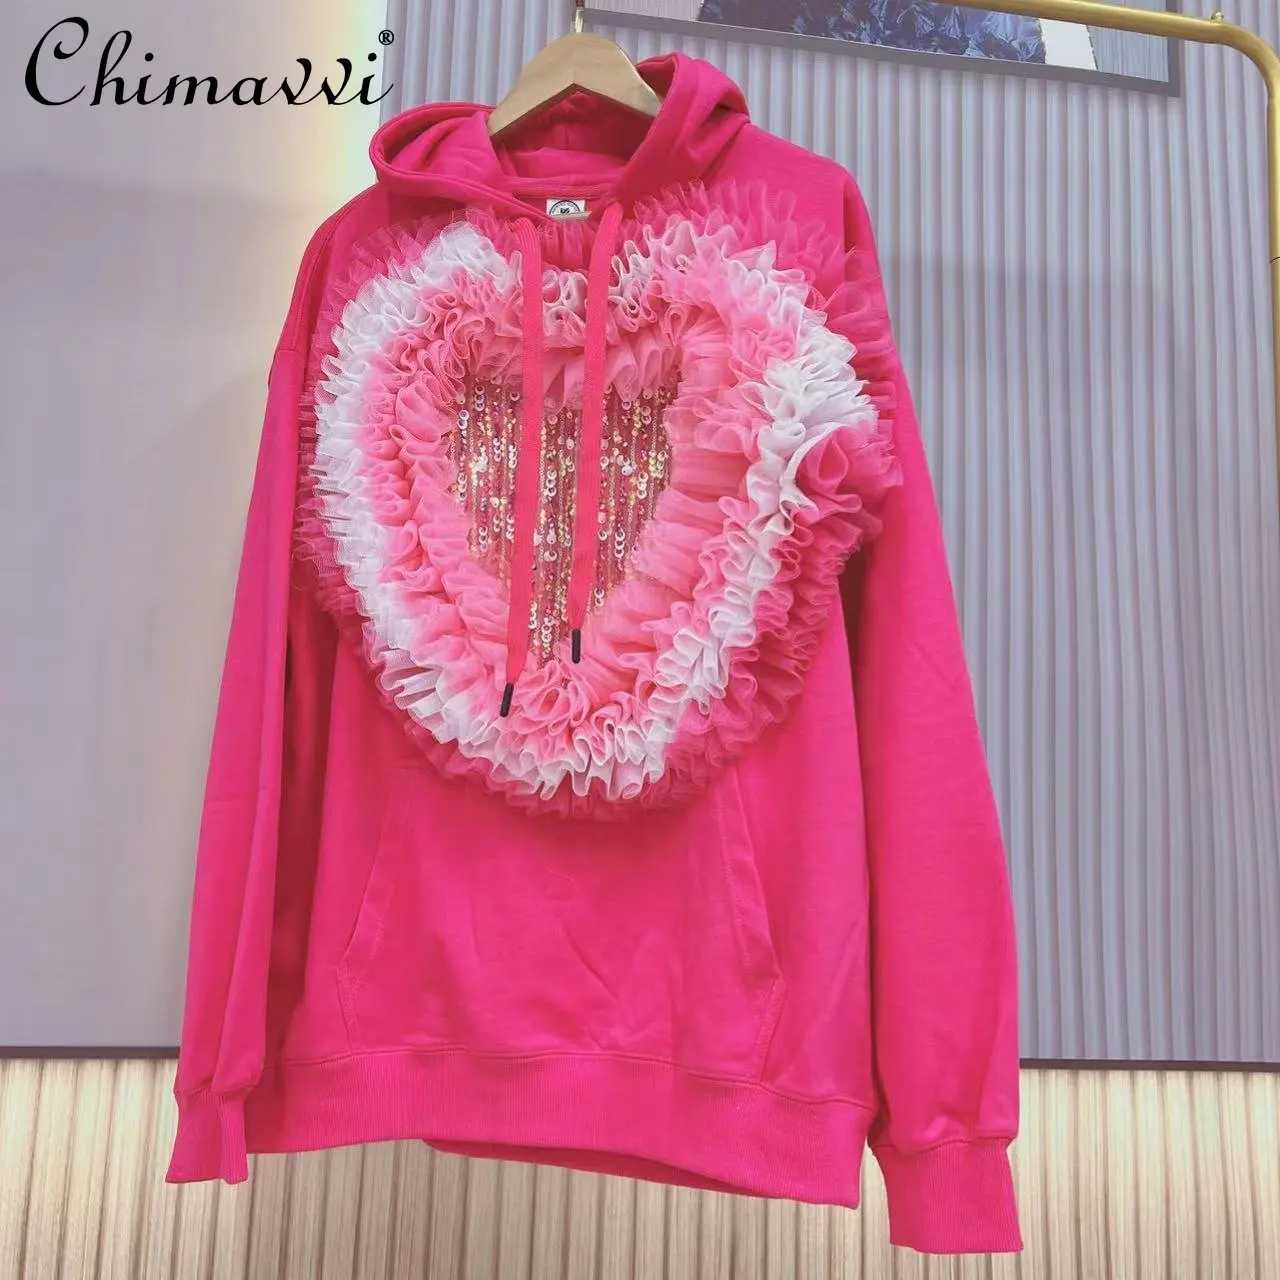 Thai Fashion High-End Designer Sequined Peach Heart Hoodie Top 2022 Winter Women's Trendy Loose Solid Pullover Hooded Sweatshirt